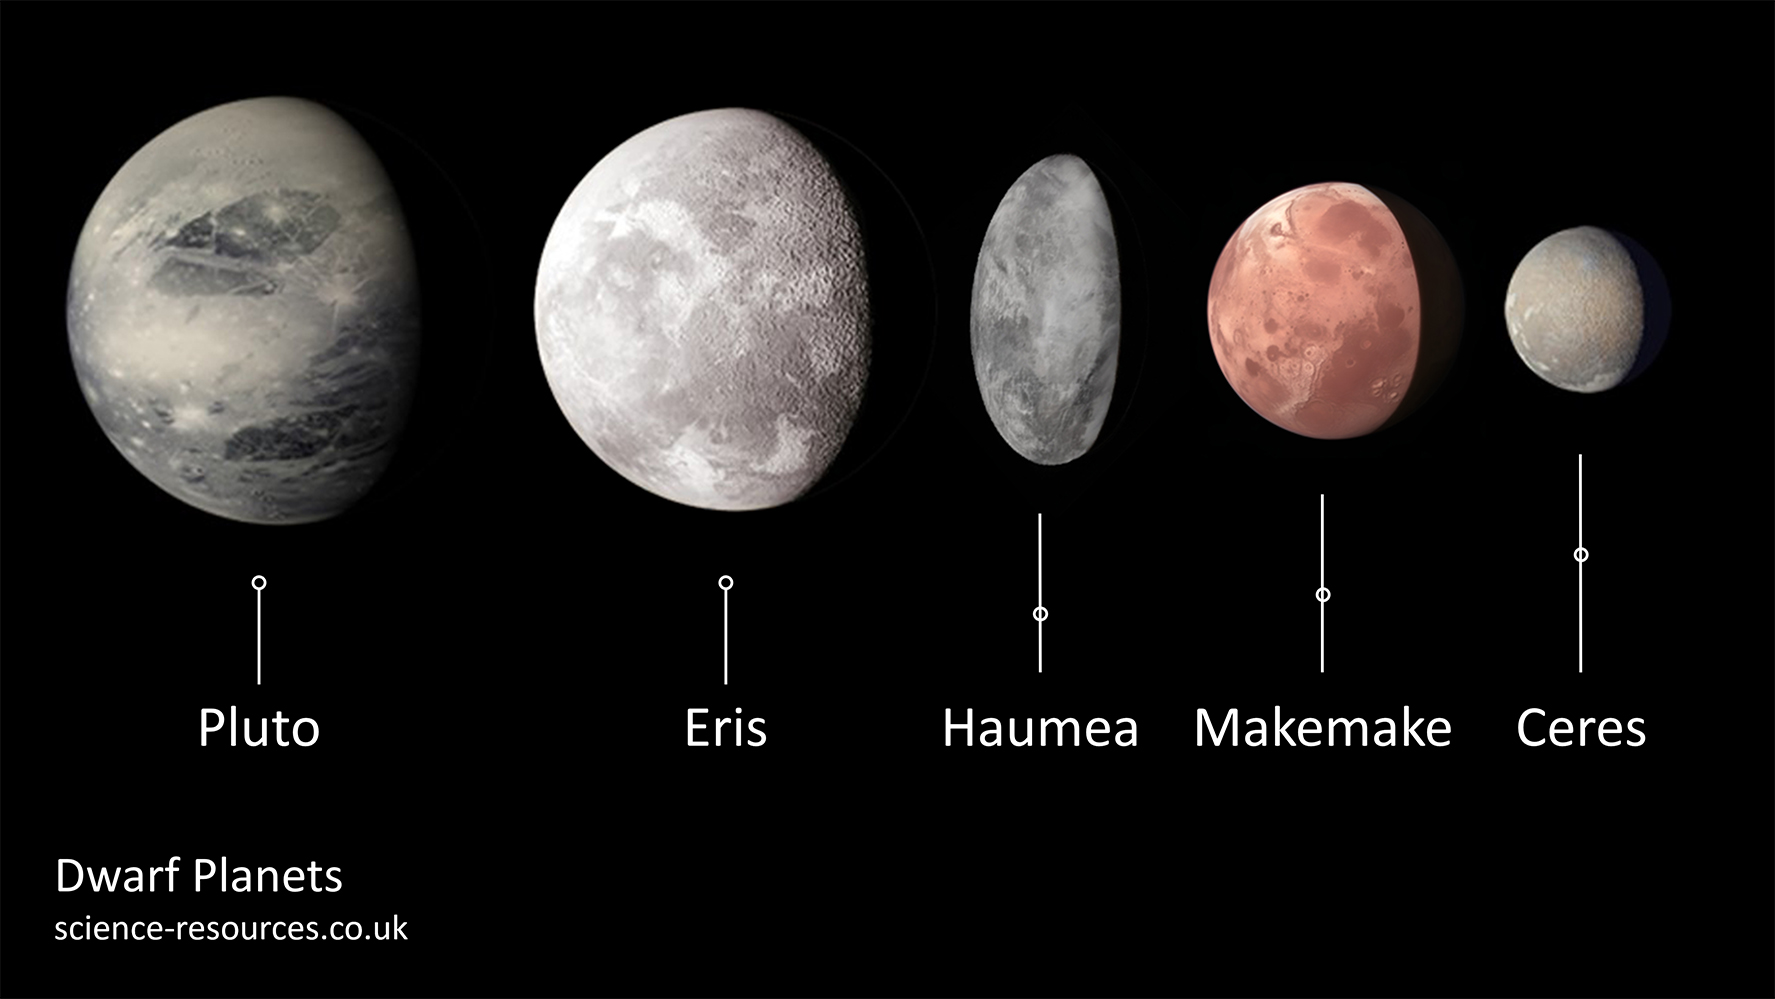 Image showing the five dwarf planets. From left to right: Pluto, Eris, Haumea, Makemake, Ceres.